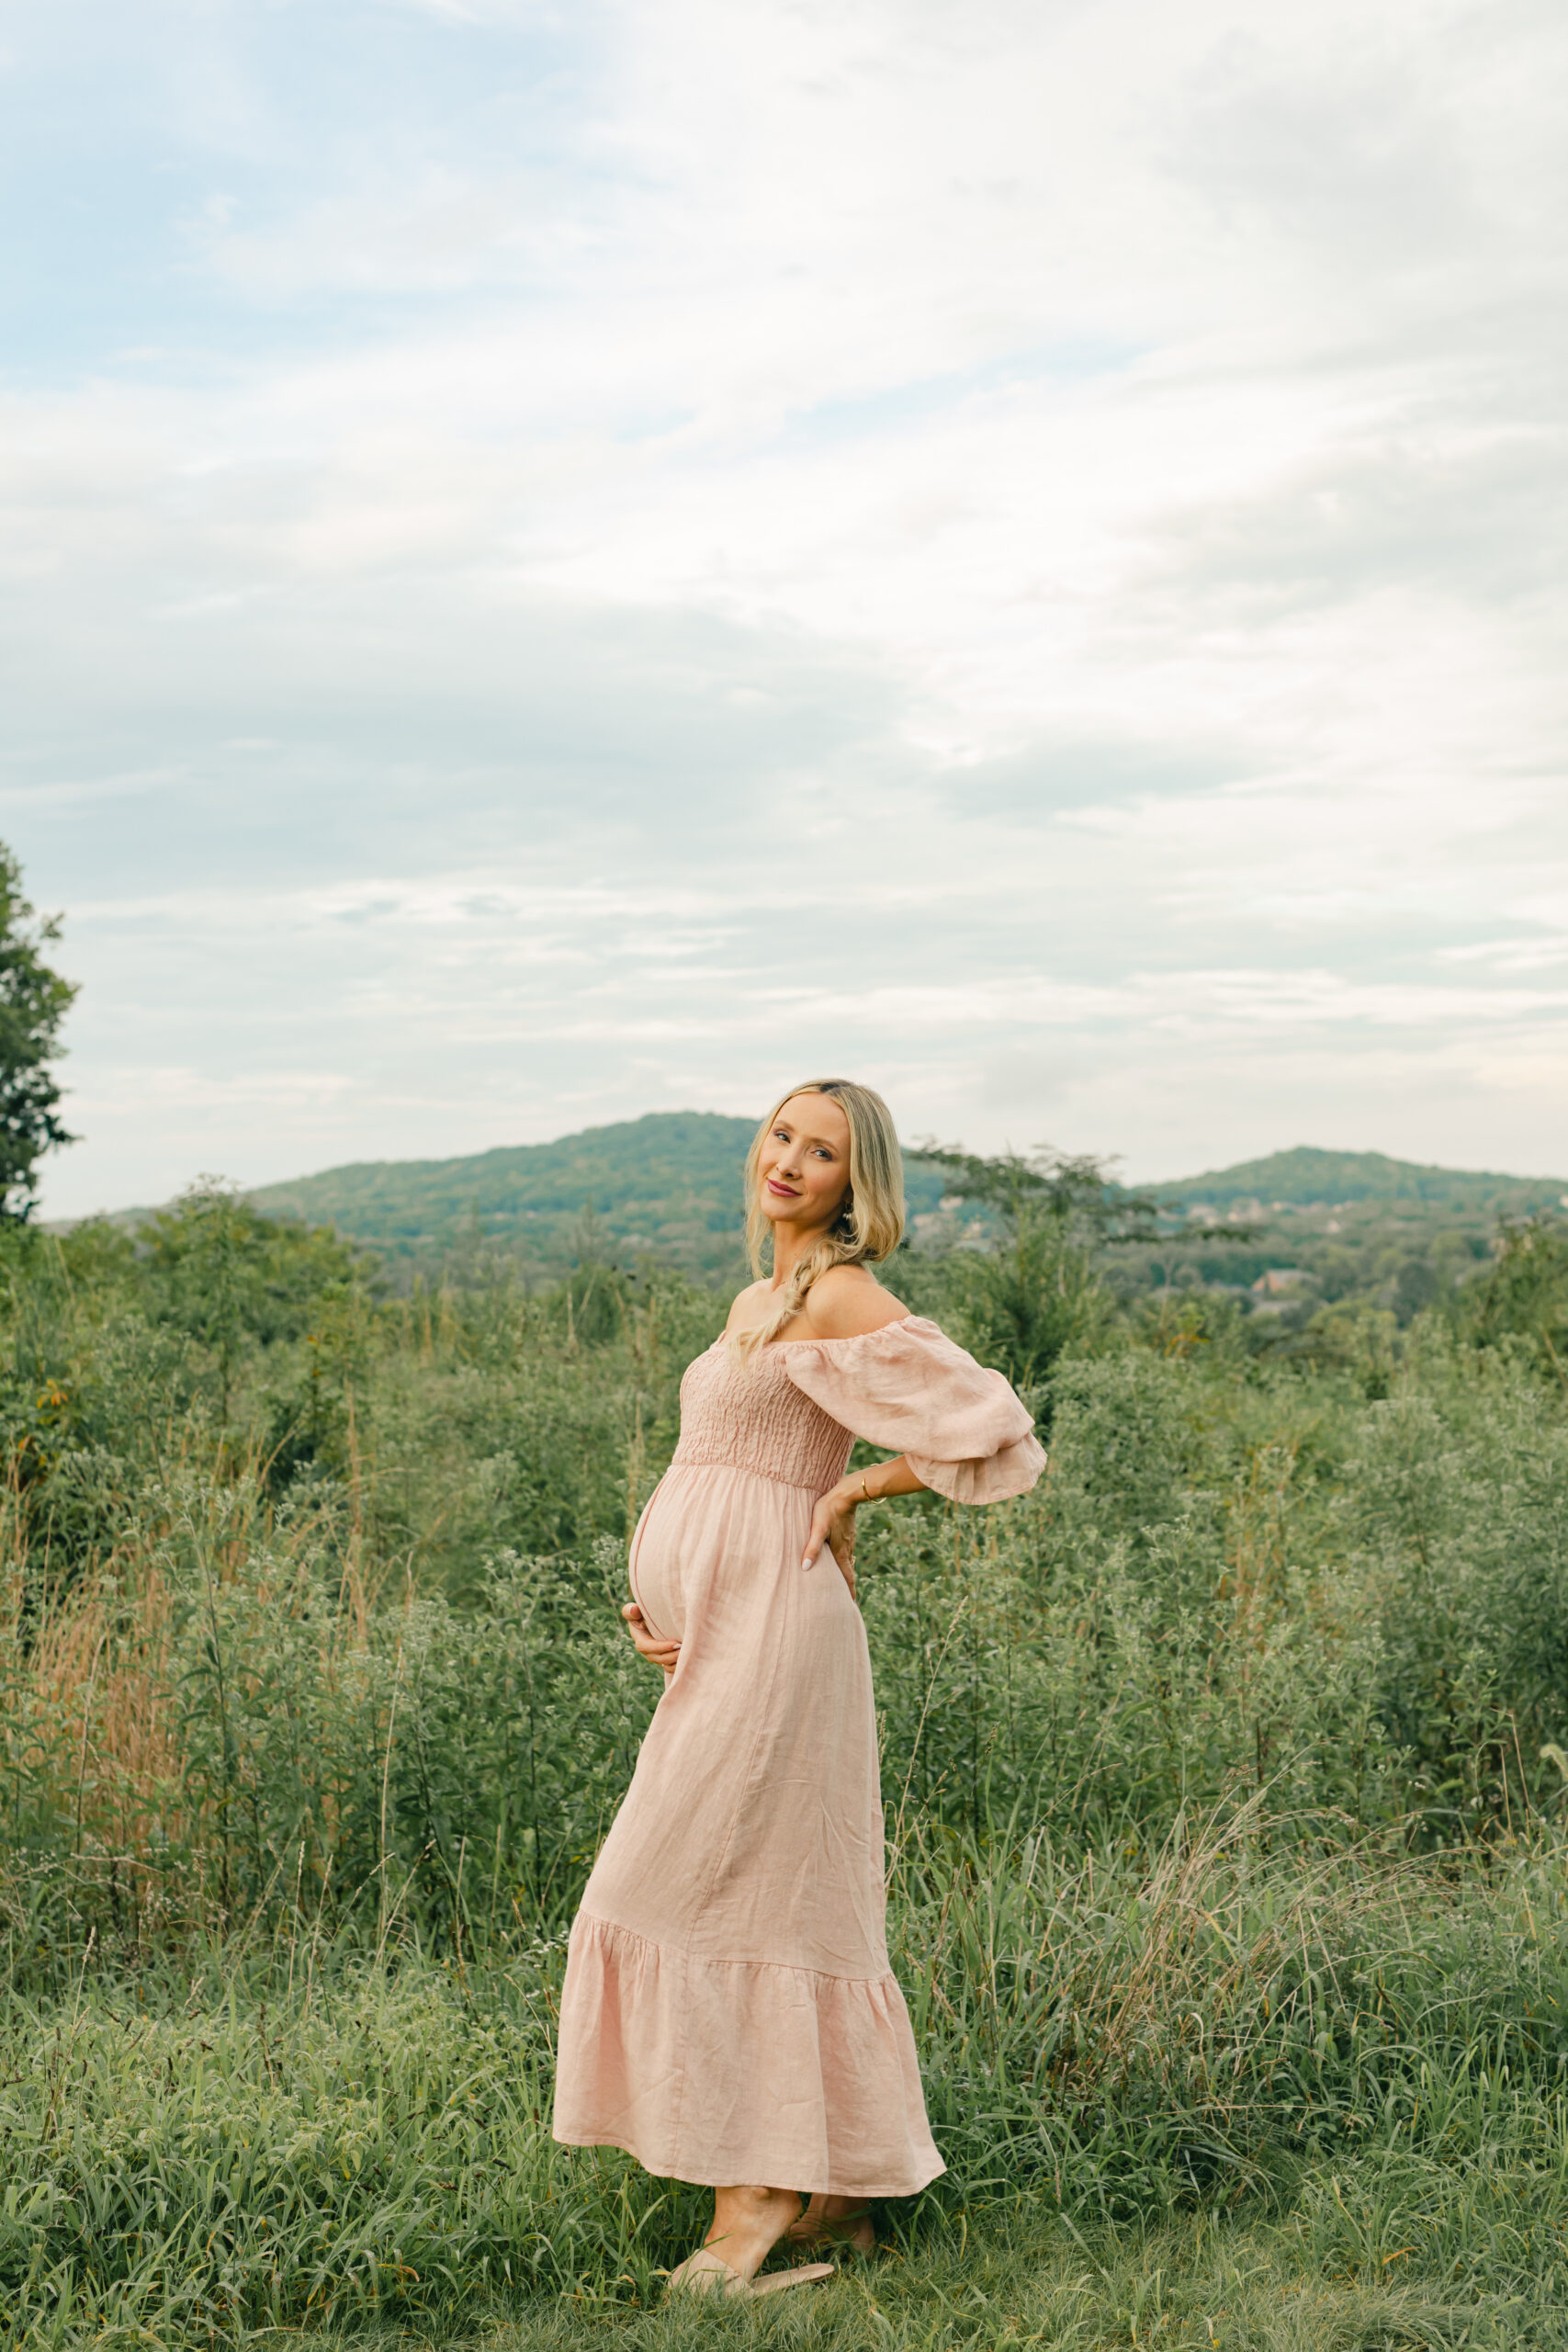 Outdoor maternity session in Nashville TN. Spring maternity photos